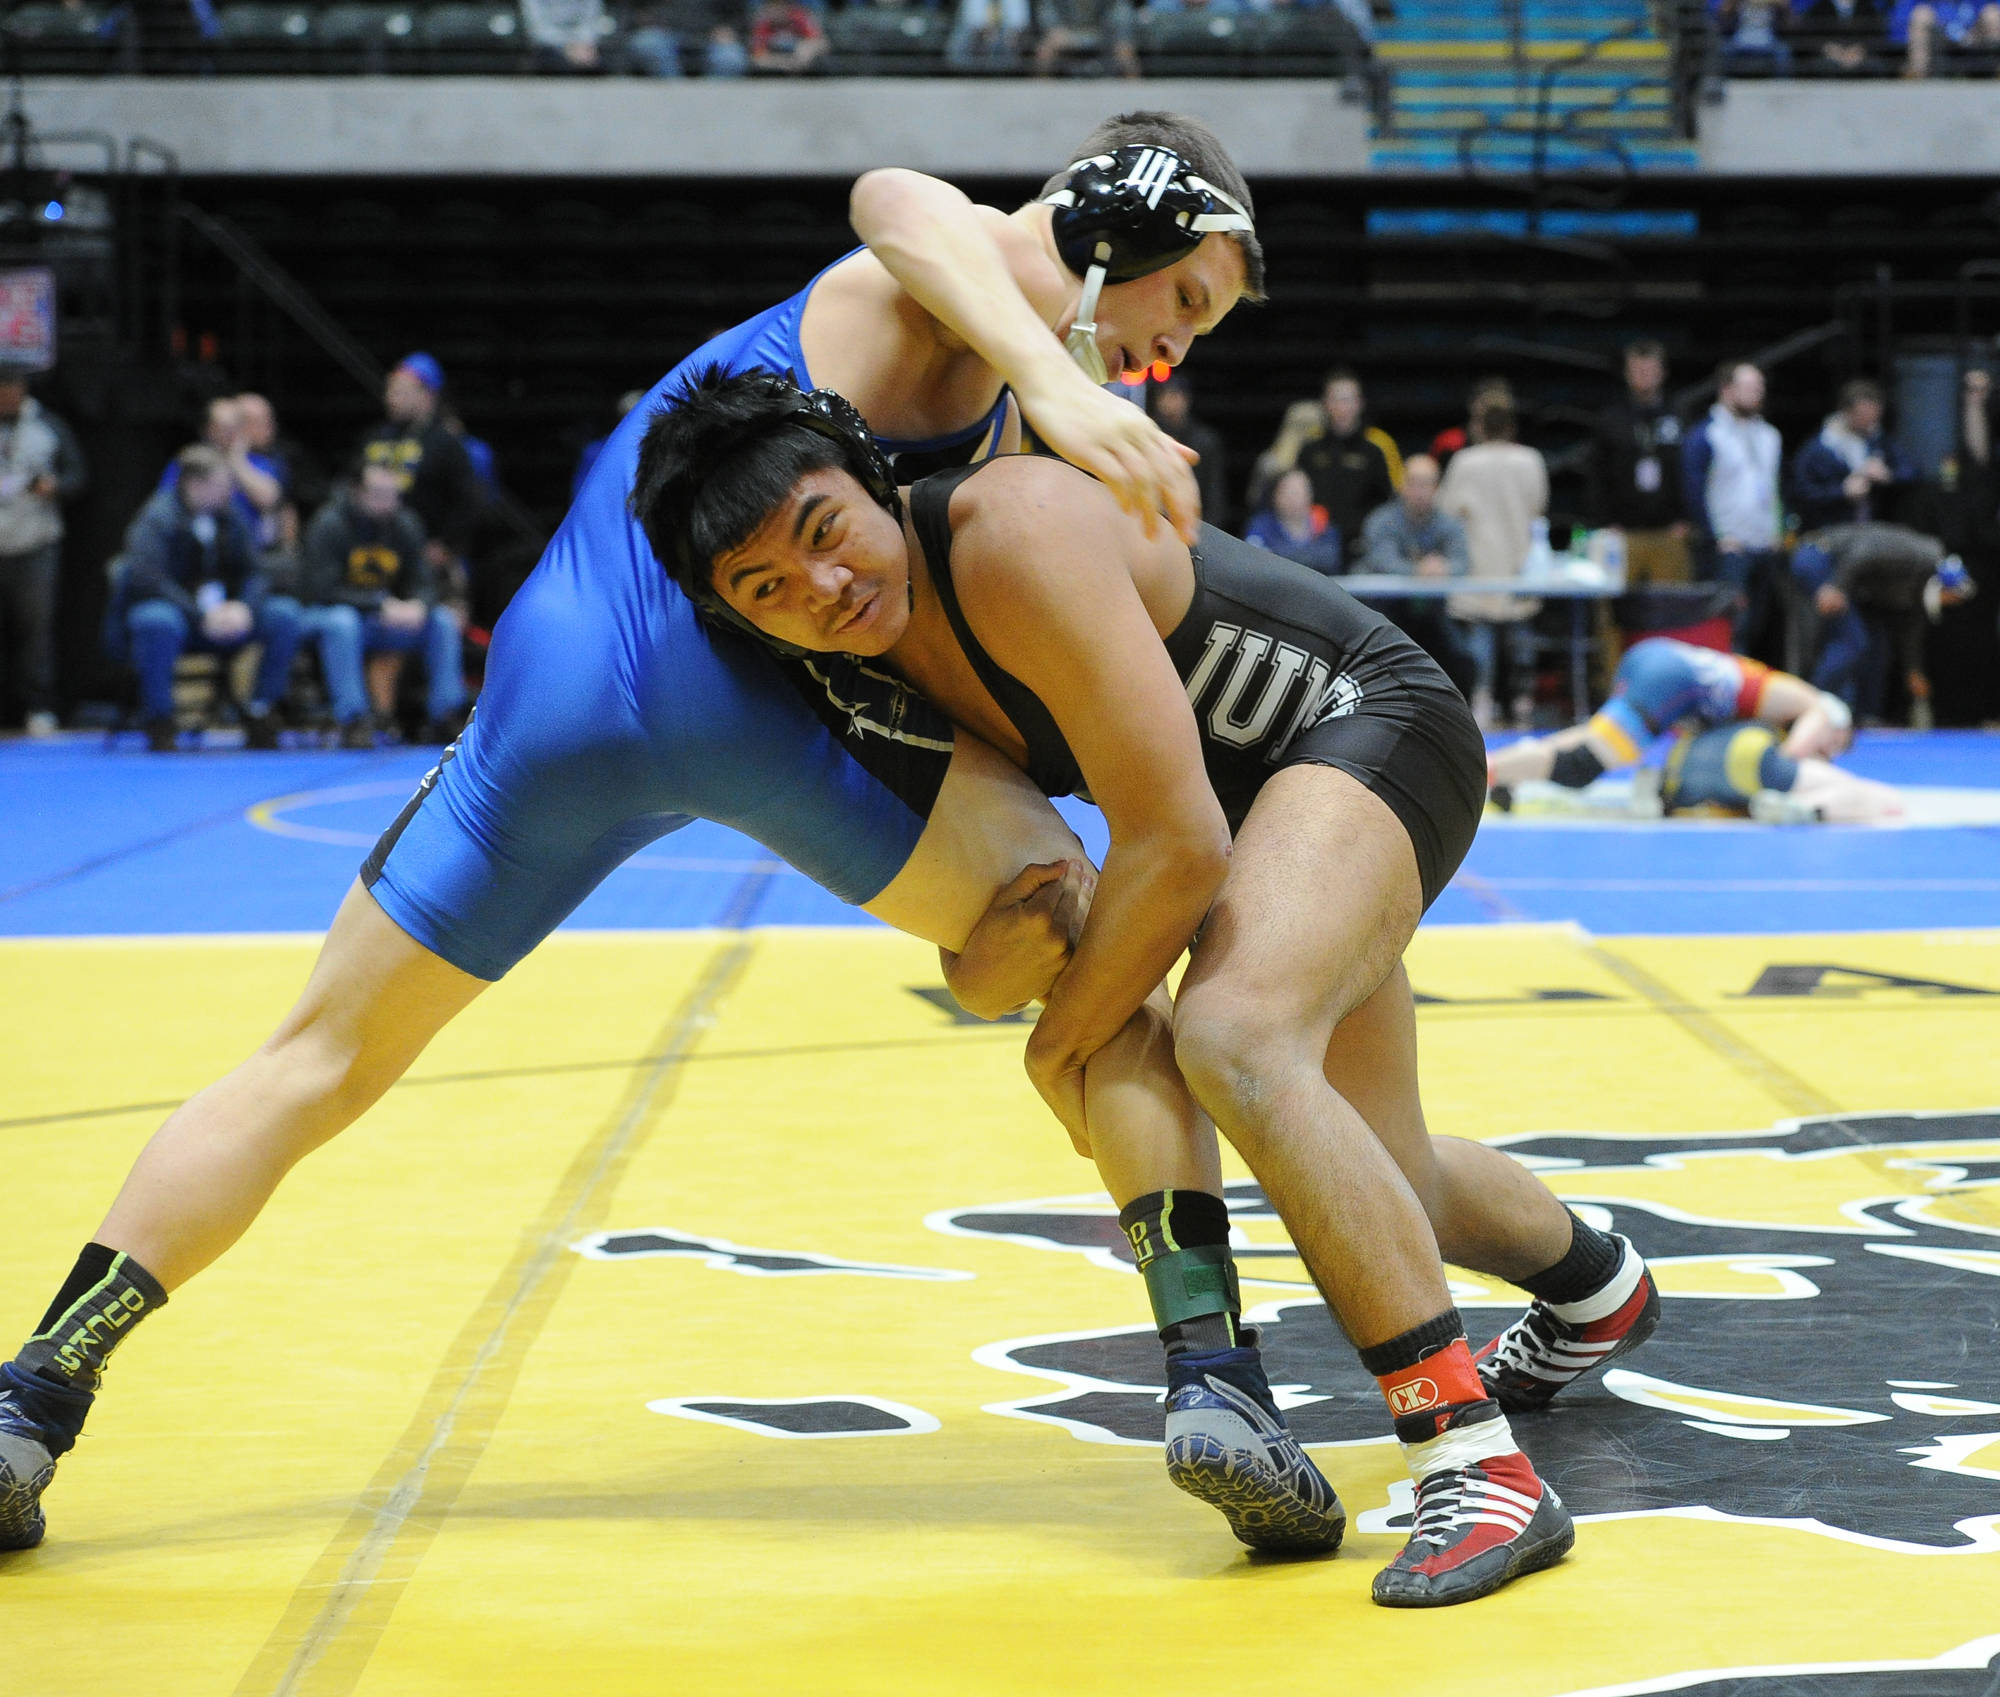 Thunder Mountain High School freshman Ezra Ellisof wrestles Soldotna’s Dennis Taylor in the first round of the 152-pound bracket at the ASAA/First National Bank Alaska Division I State Wrestling Championships at the Alaska Airlines Center in Anchorage on Friday, Dec. 14, 2018. Ellisof was pinned at 1:44. (Michael Dinneen | For the Juneau Empire)